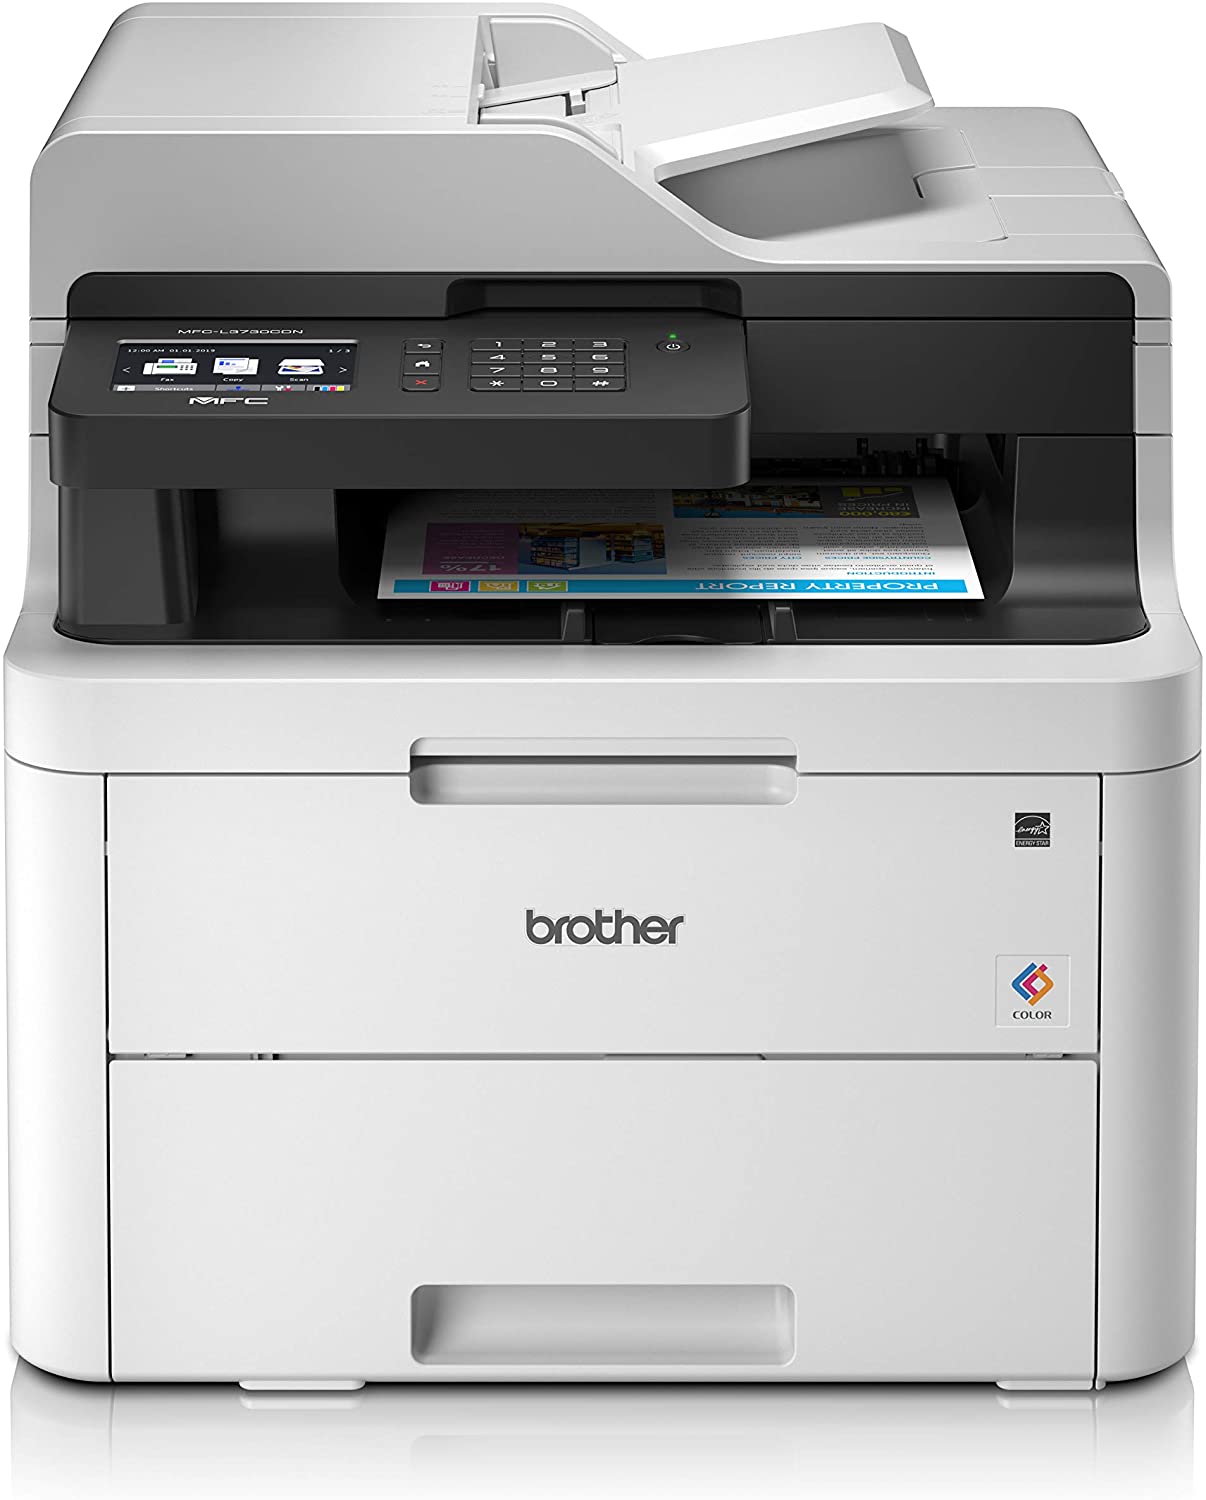  Brother MFC-L3730CDN Colour Laser Printer - All-in-One, USB 2.0,Network, Printer,Scanner,Copier,Fax Machine uk reviews